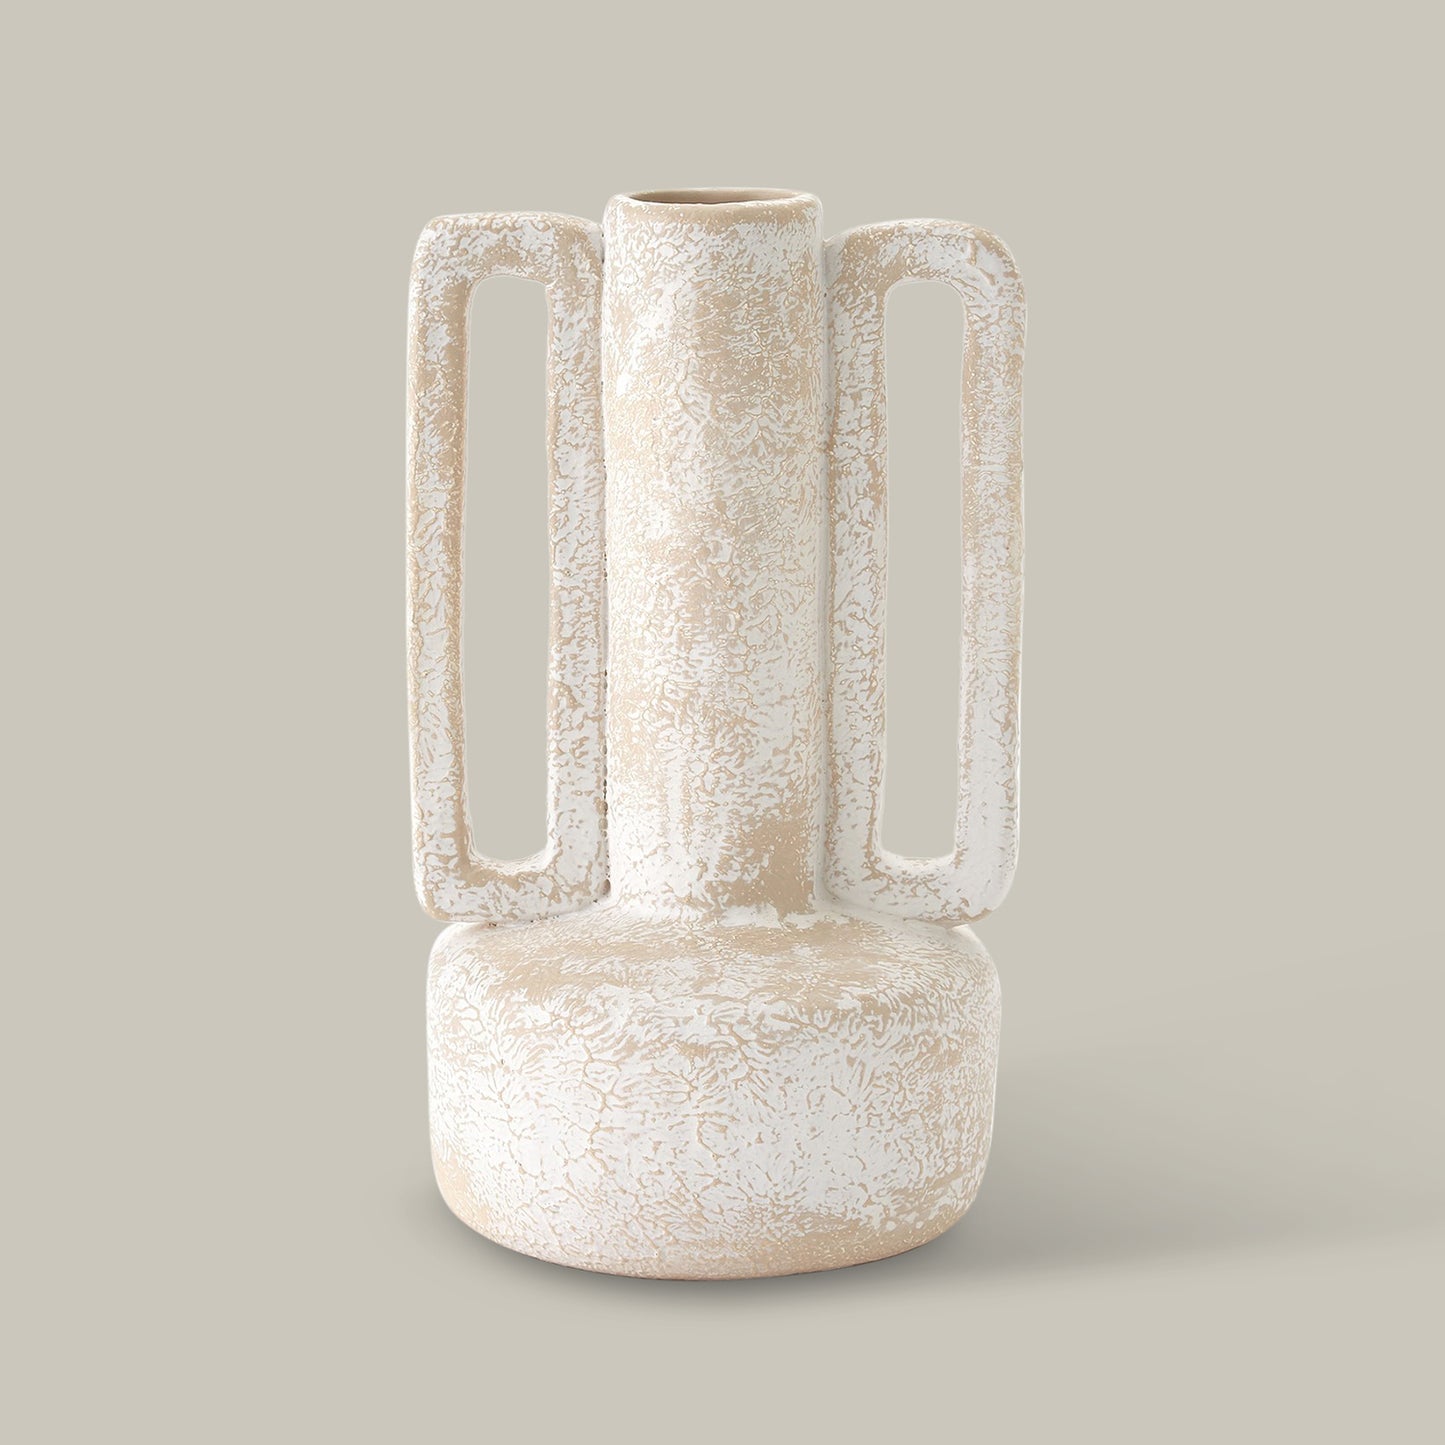 NORMANDIE AND BRETAGNE VASE COLLECTION - (NATURAL) - Preorder